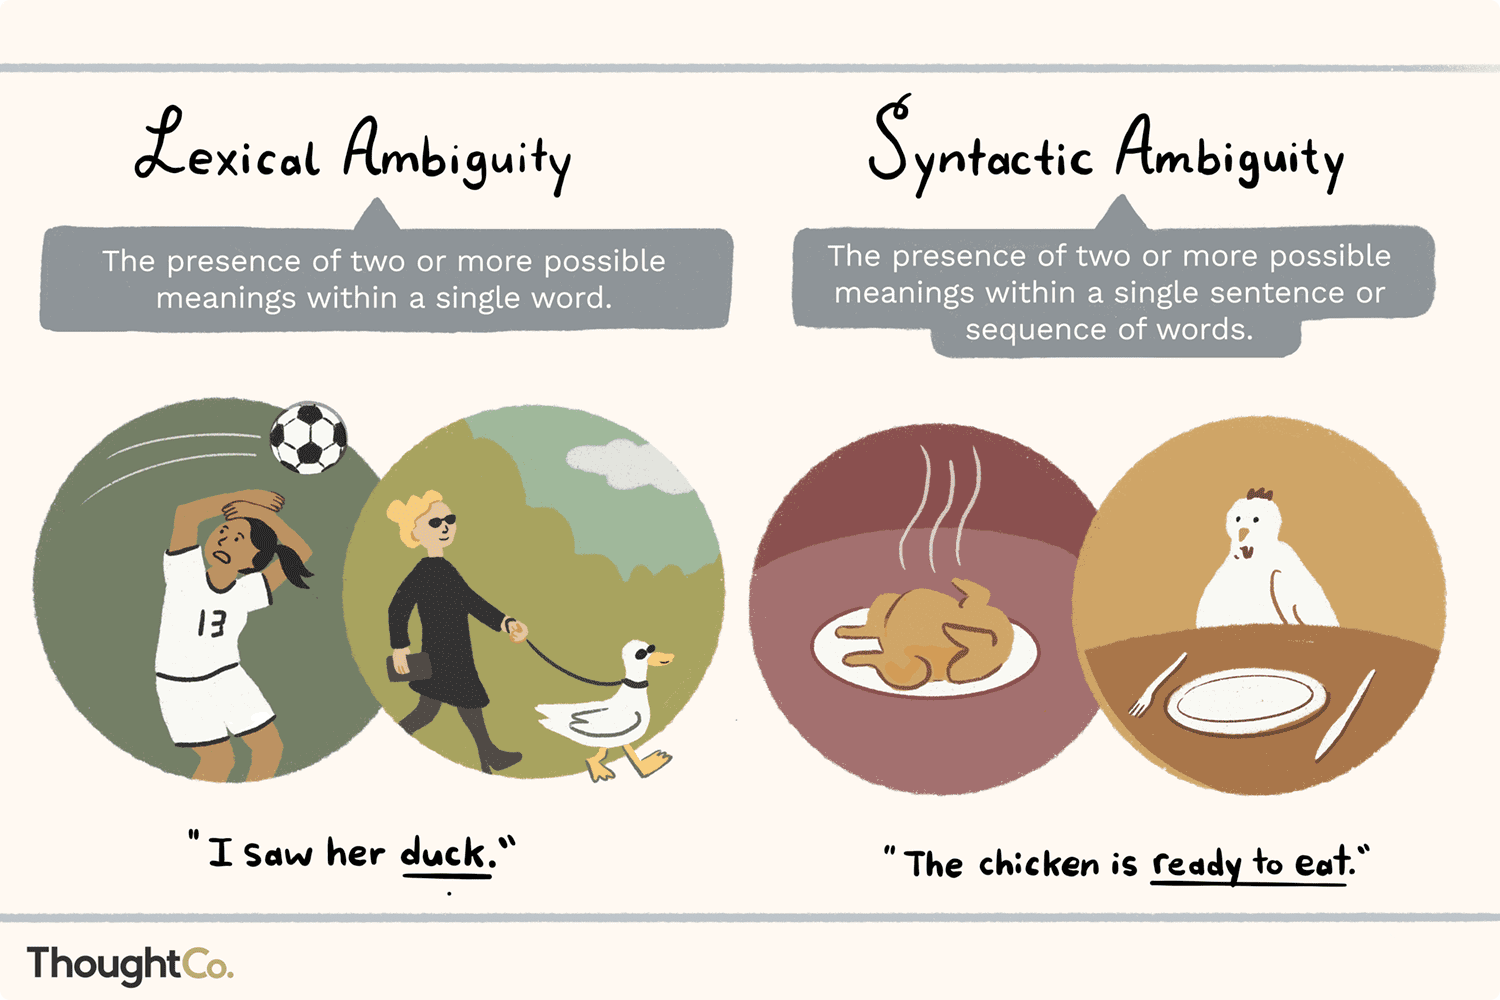 Examples of syntactic and lexical ambiguity. Lexica=l ambiguity is when the presence of two or more possible meanings is contained within a single word (I saw her duck), while syntactic is the presence of two or more possible meanings within a single sentence or sequence of words (the chicken is ready to eat)